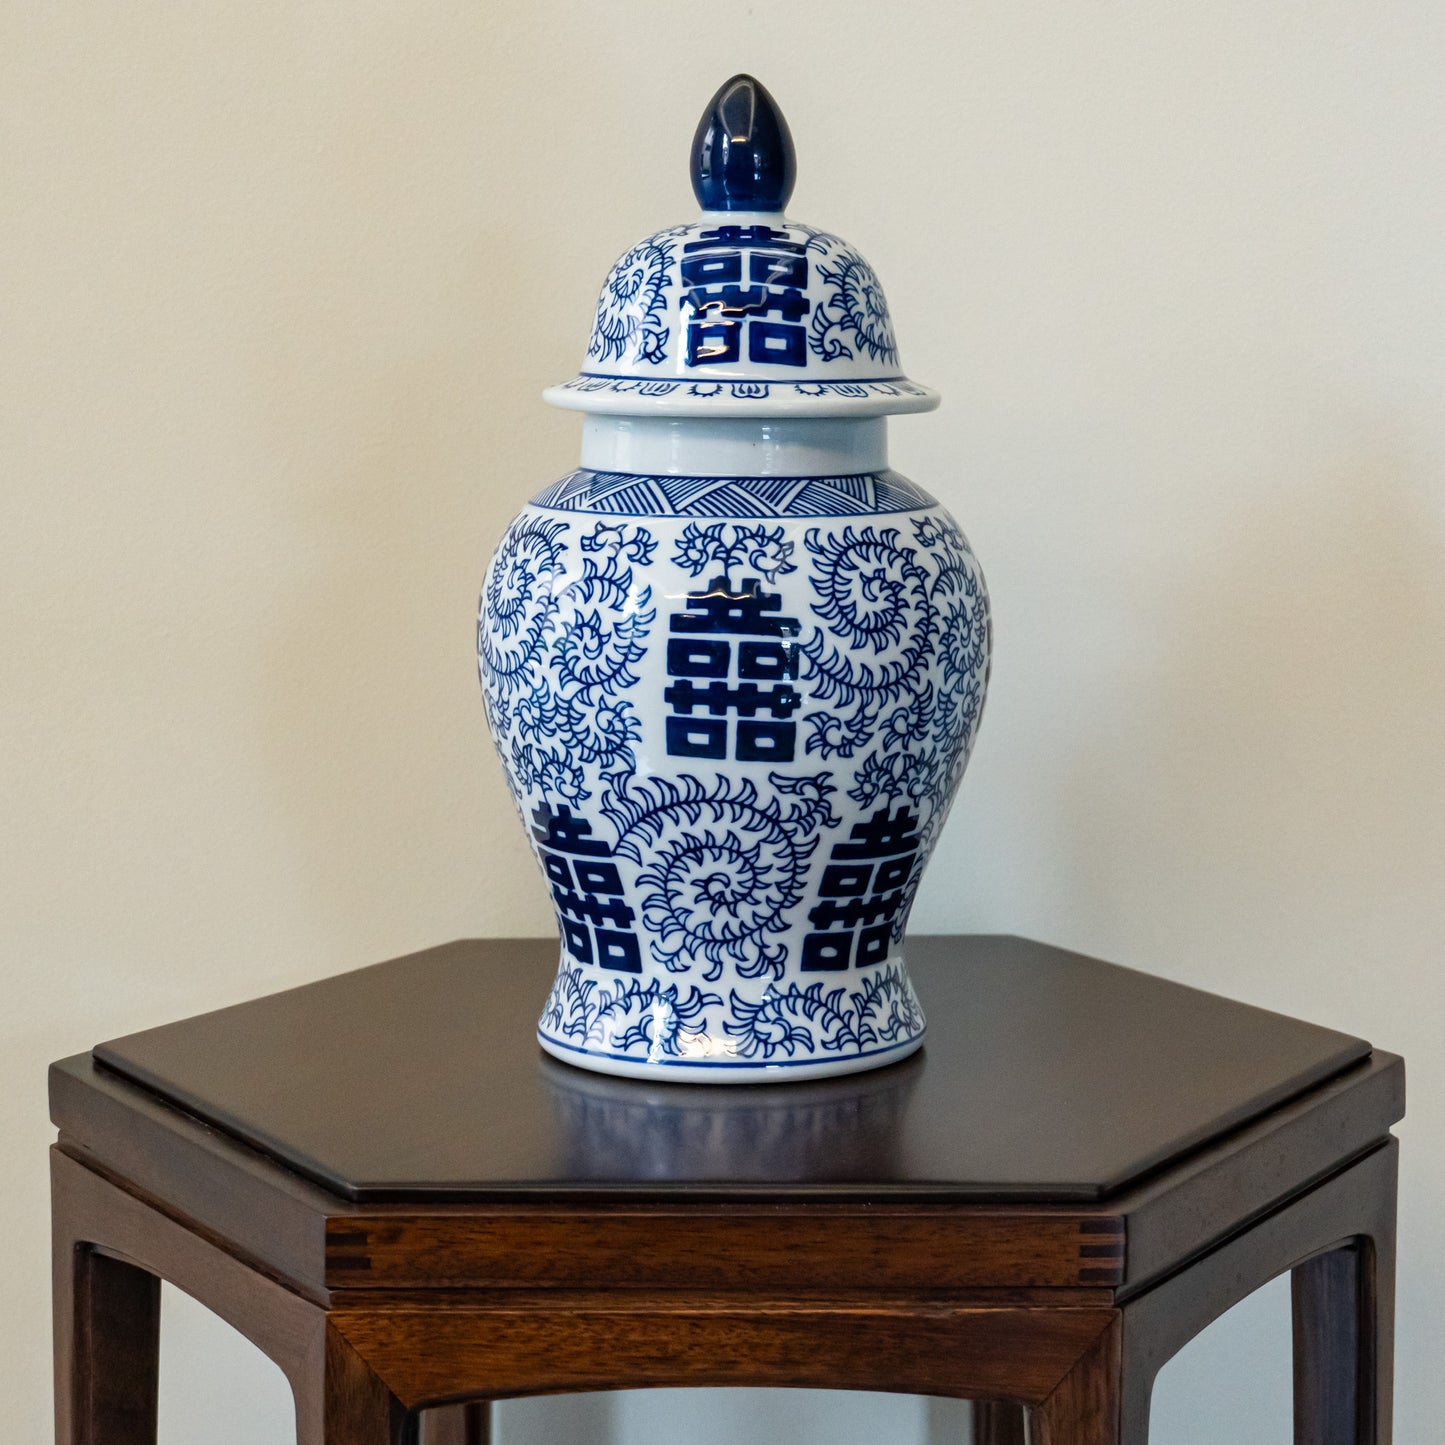 Ginger Jar Double Happiness Blue and White with Lotus Motif - Traditional Chinese Porcelain Vase - Home and Office Decor